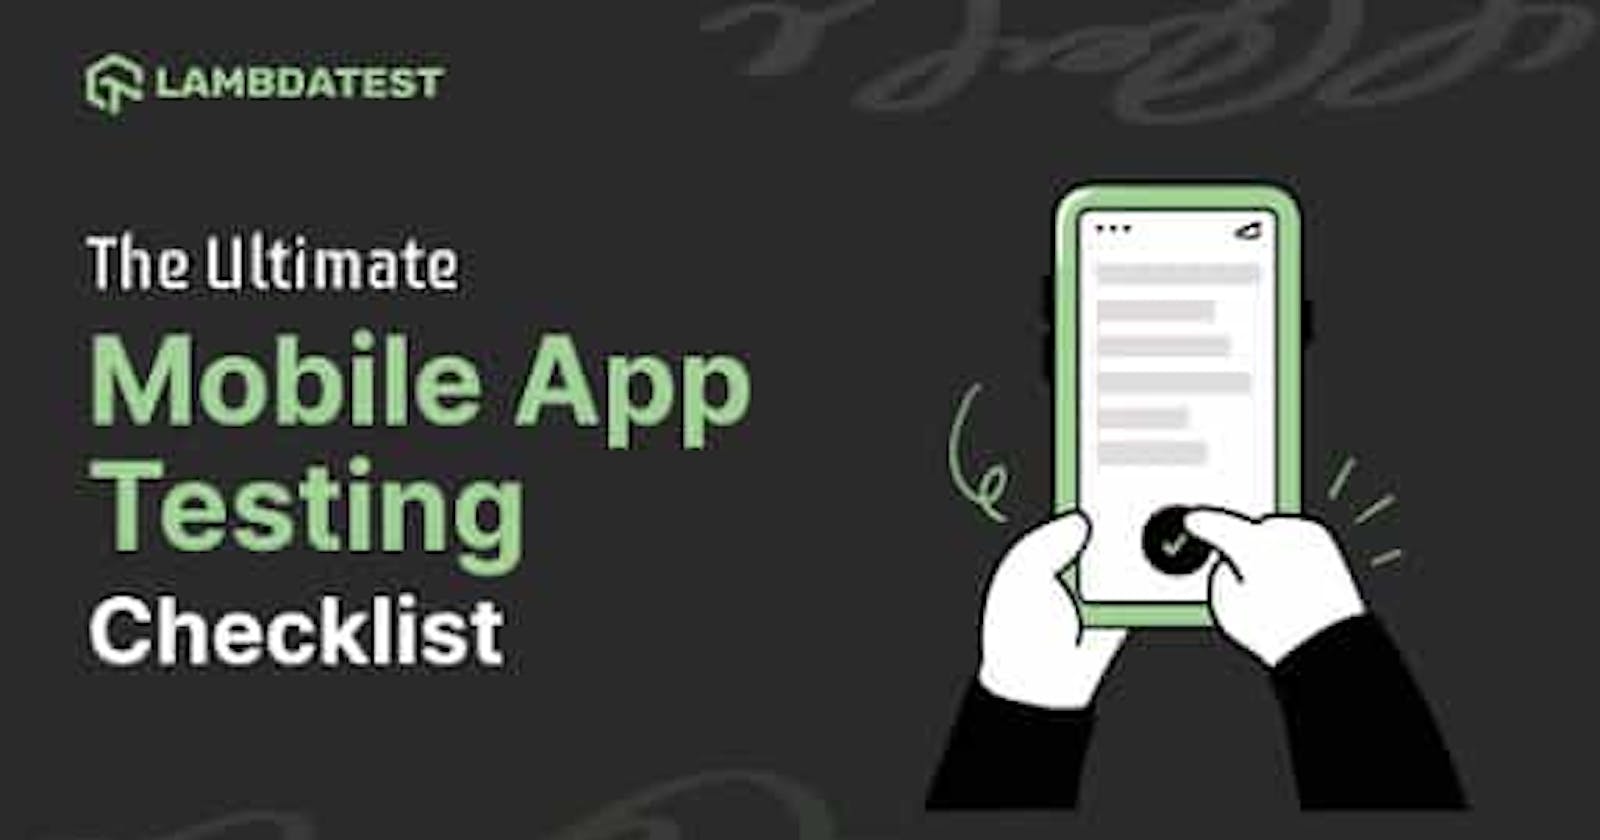 The Ultimate Mobile App Testing Checklist